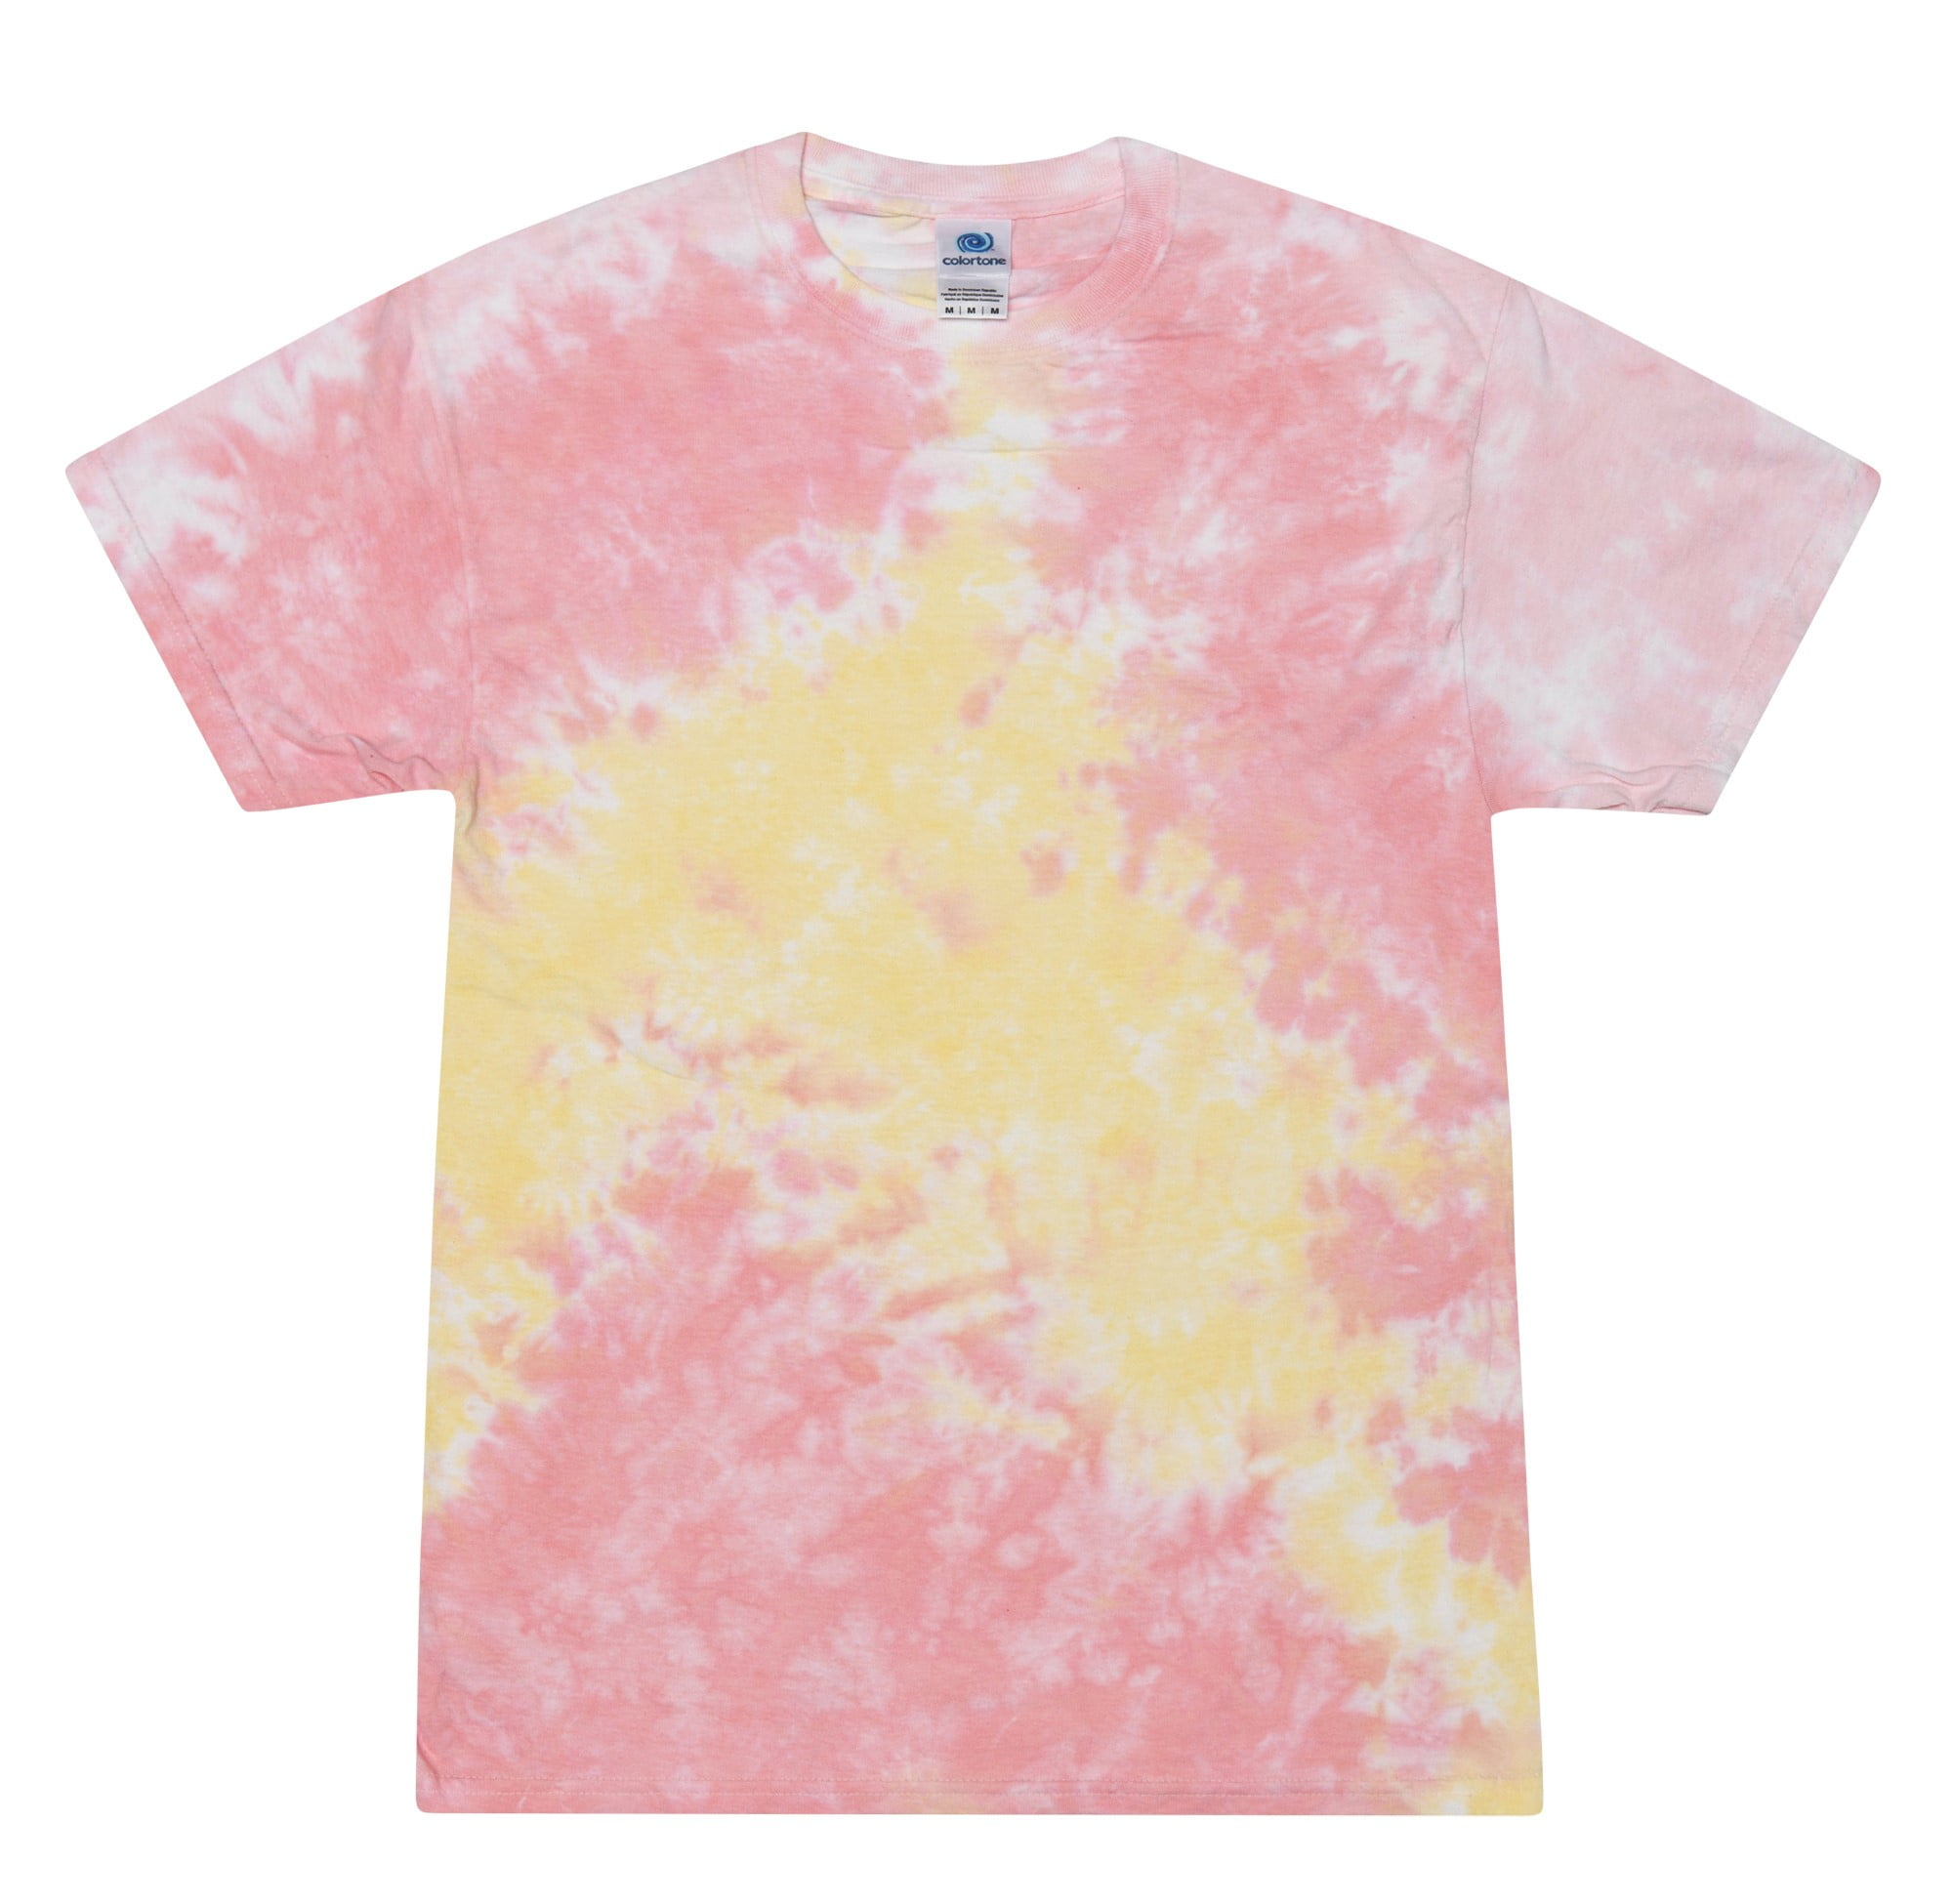 Kids Tie Dye T-shirt - Pink, Extra-Small